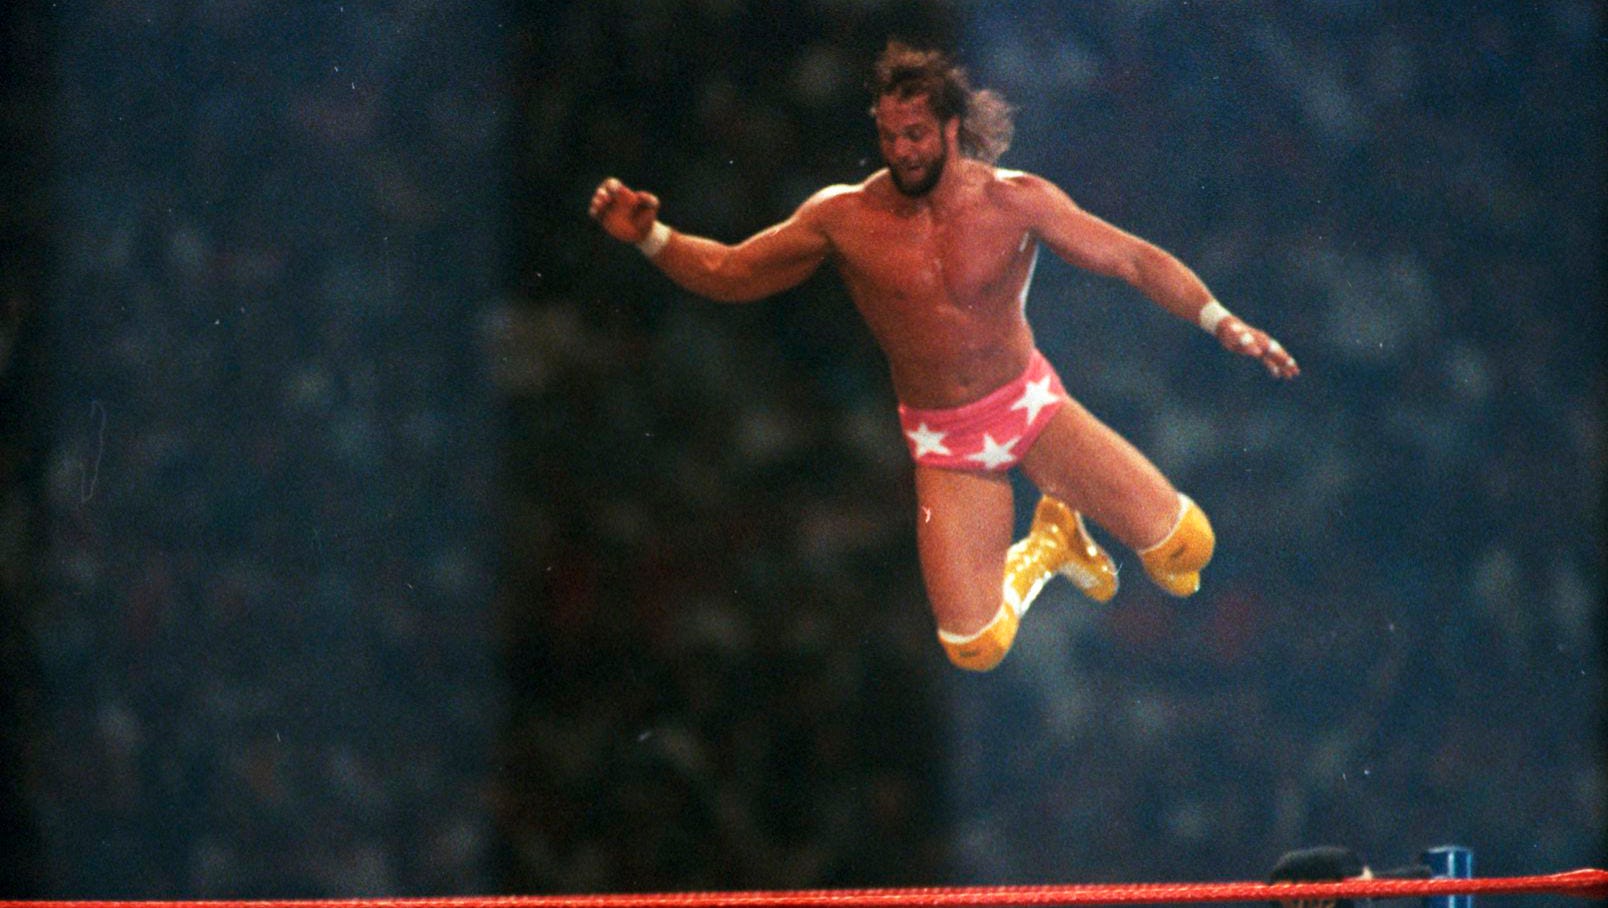 Randy "Macho Man" Savage goes flying off the top rope during his epic match with Ricky "The Dragon" Steamboat.